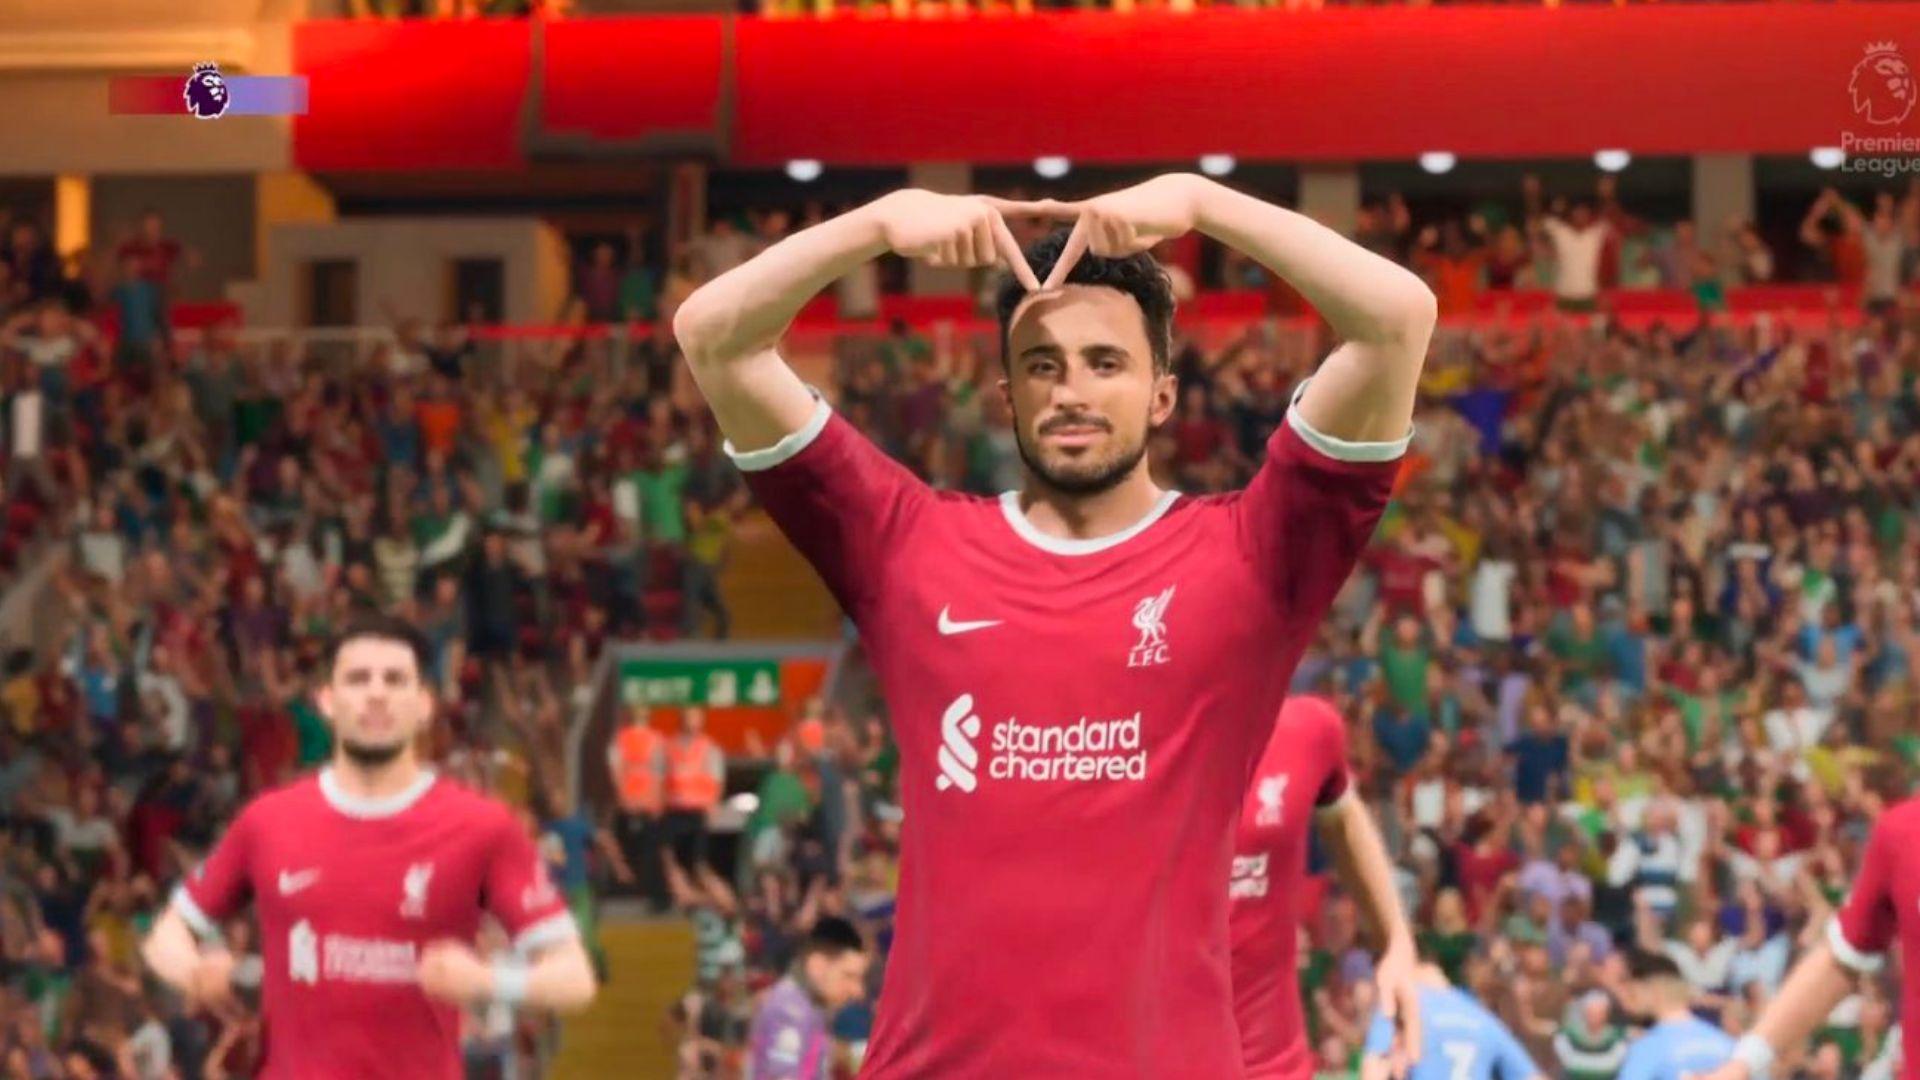 Diogo Jota in Liverpool doing EA SPORTS FC celebration with Triangle logo